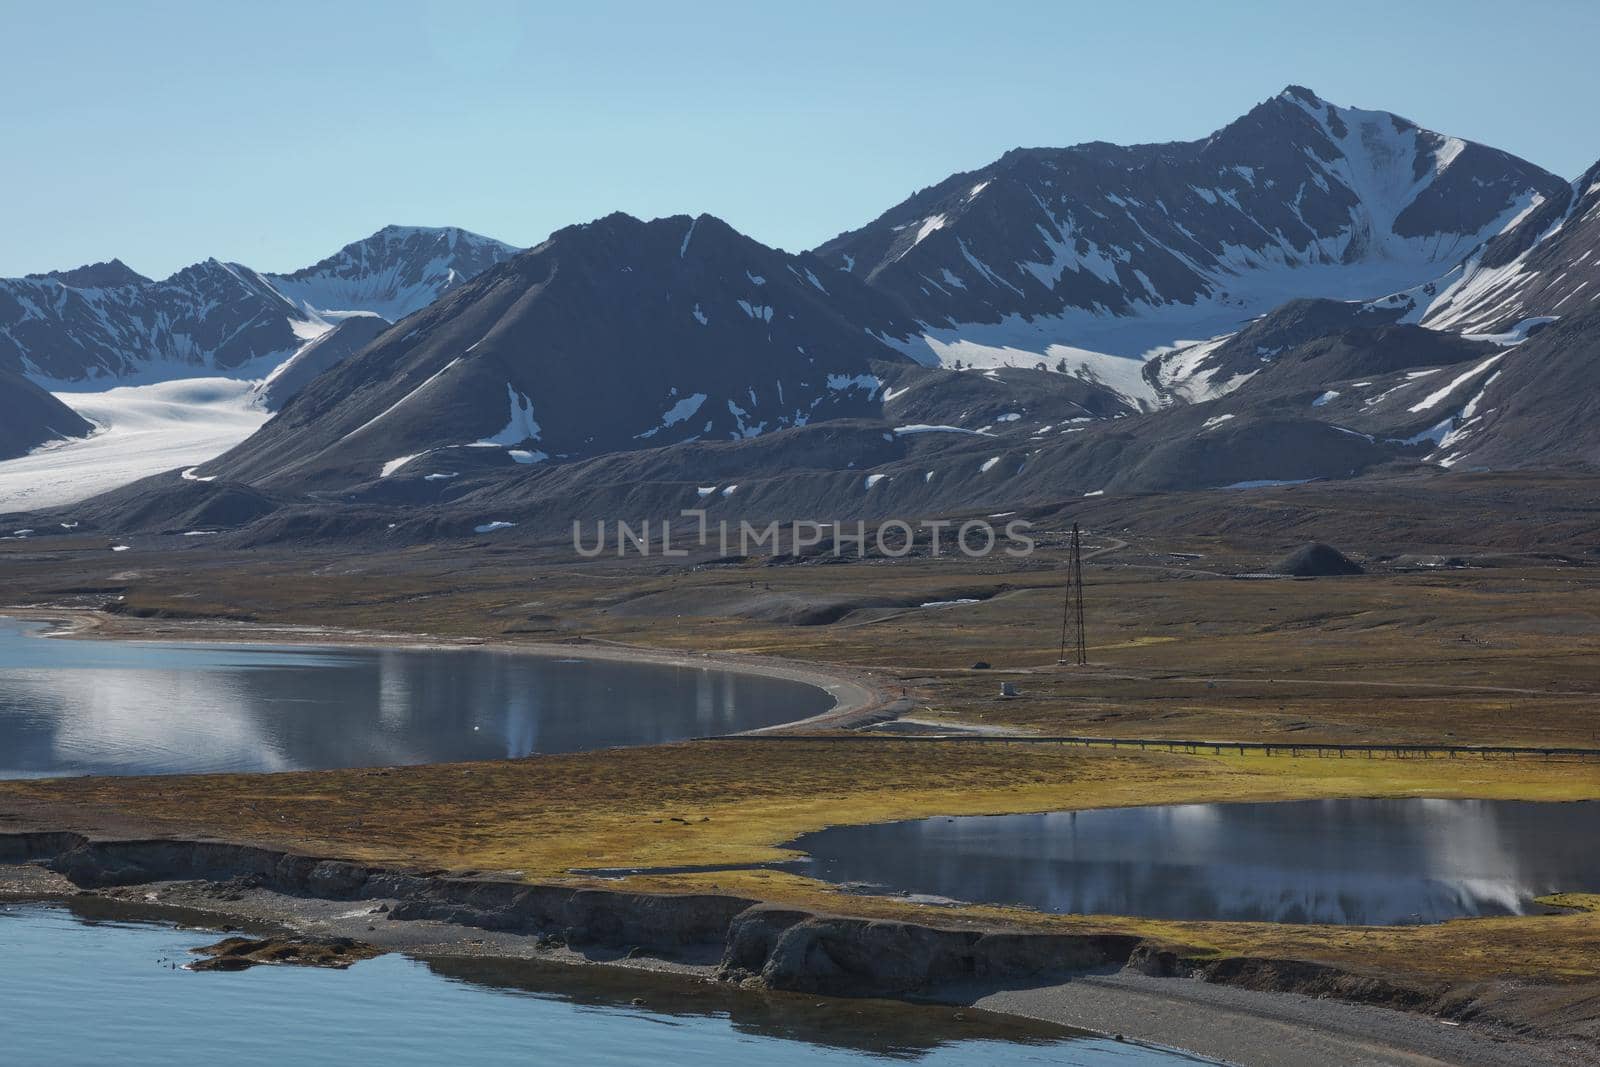 Mountains, glaciers and coastline landscape close to a village called "Ny-Ålesund" located at 79 degree North on Spitsbergen.